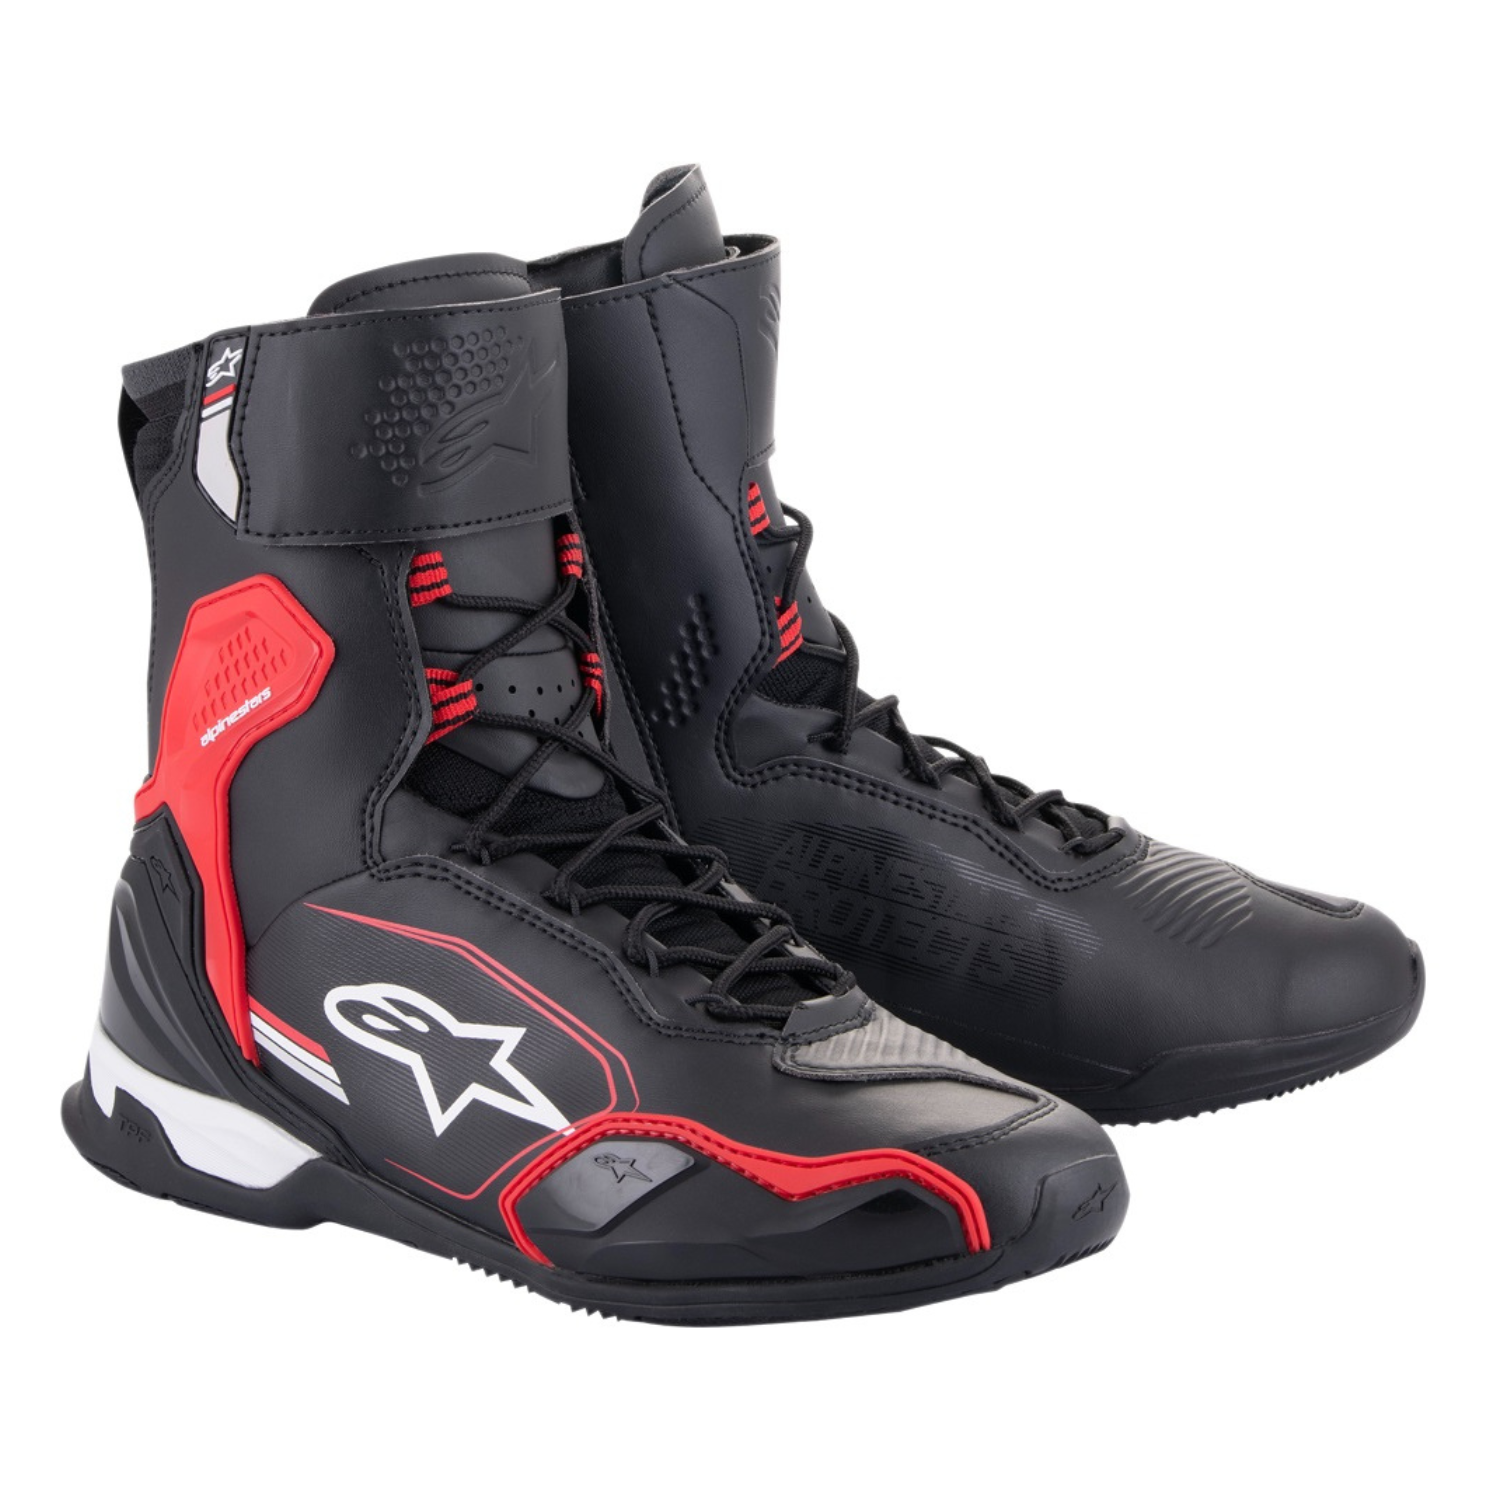 Image of Alpinestars Superfaster Shoes Black Bright Red White Talla US 10